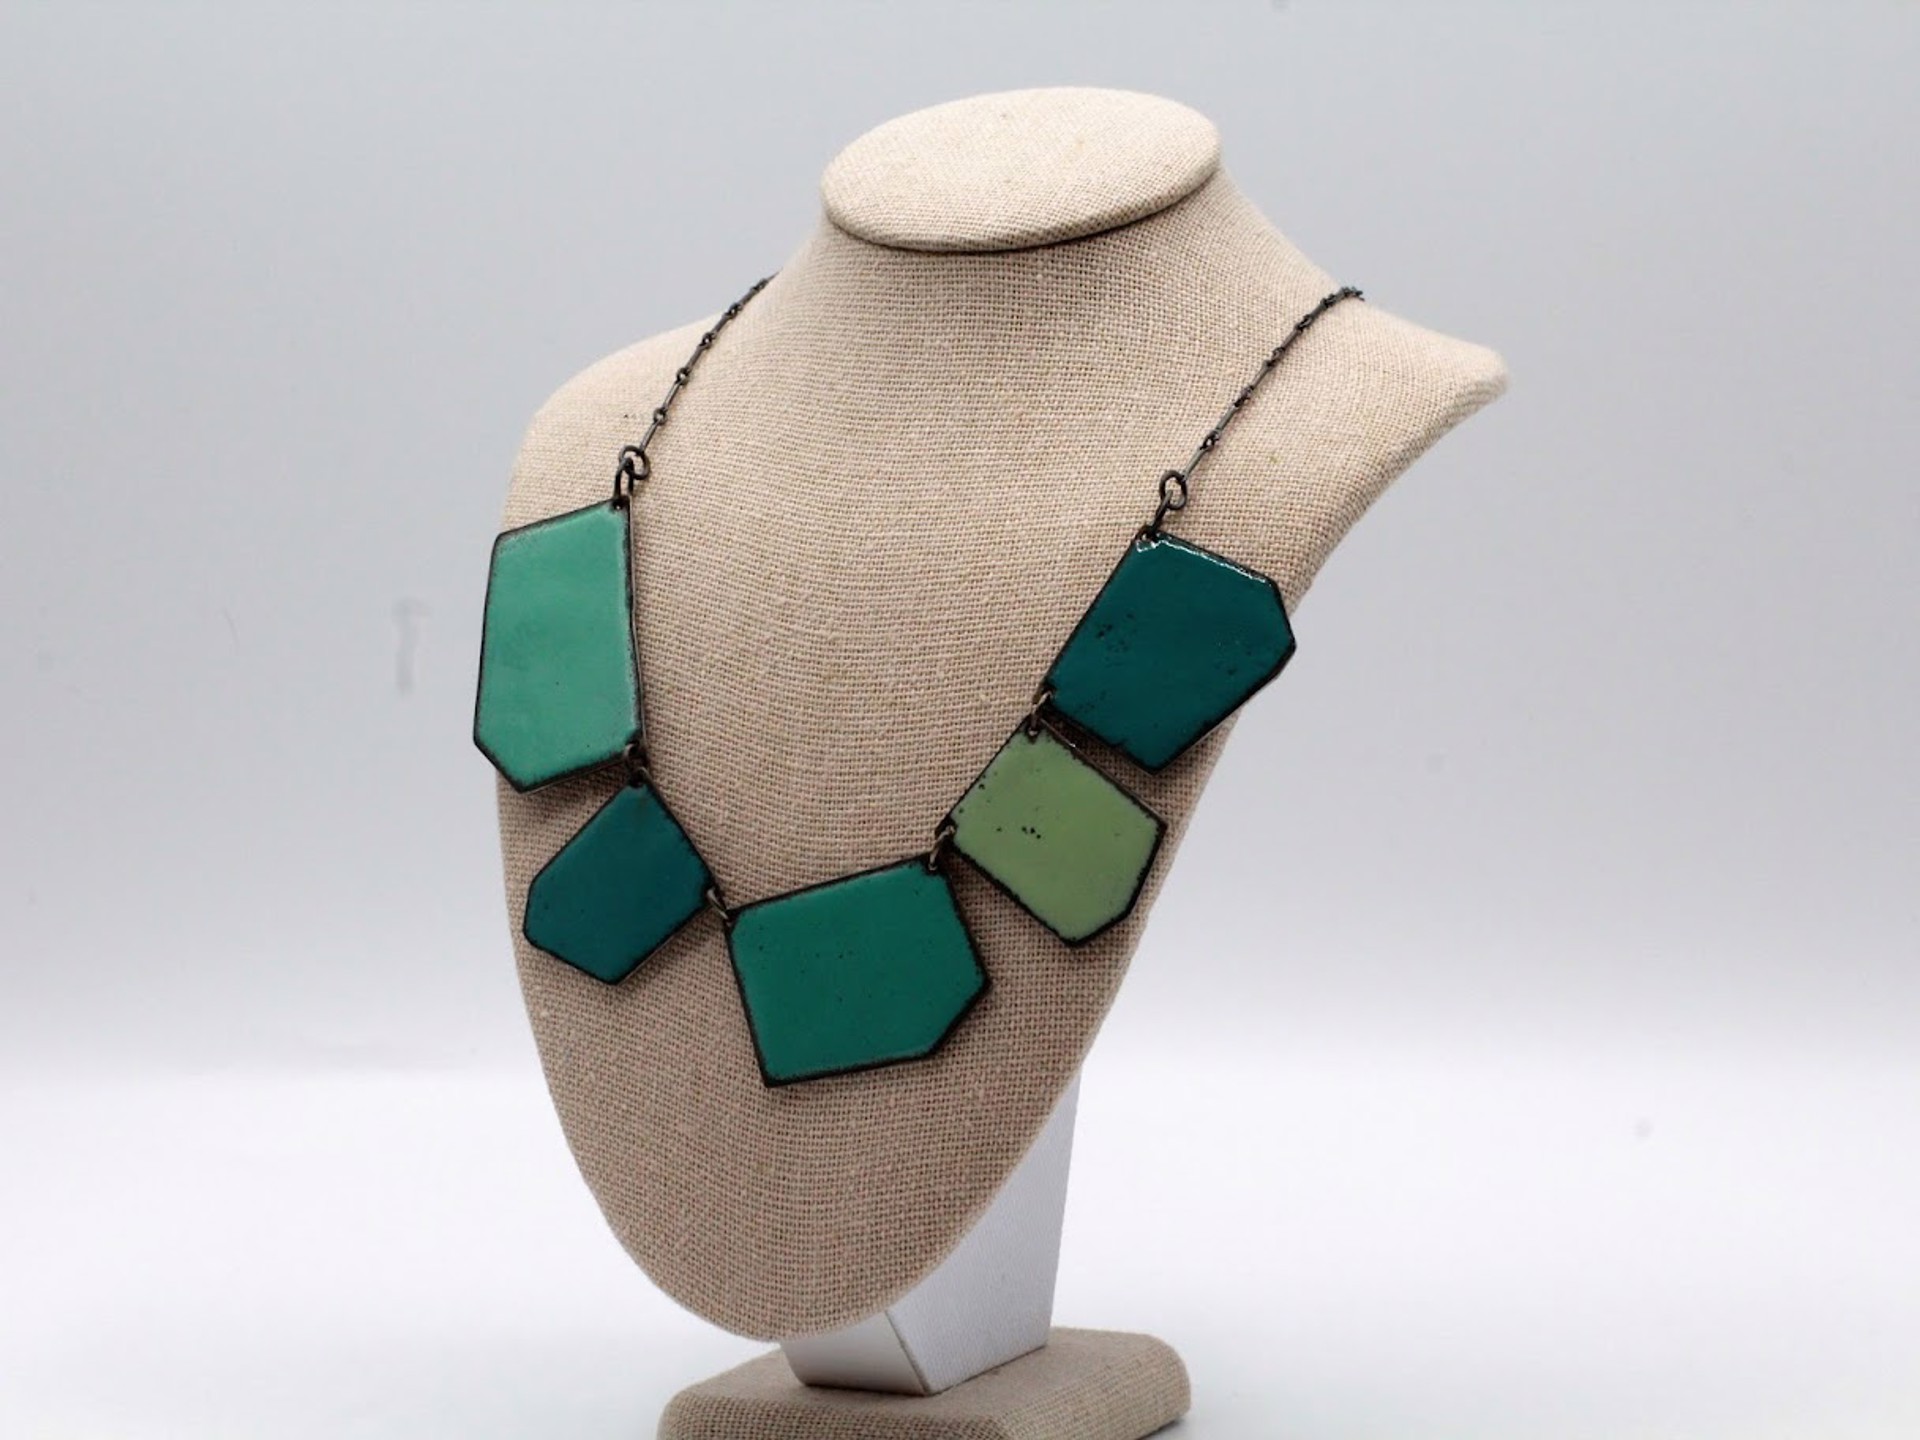 Tertiary Necklace - Turquoise by April Hale